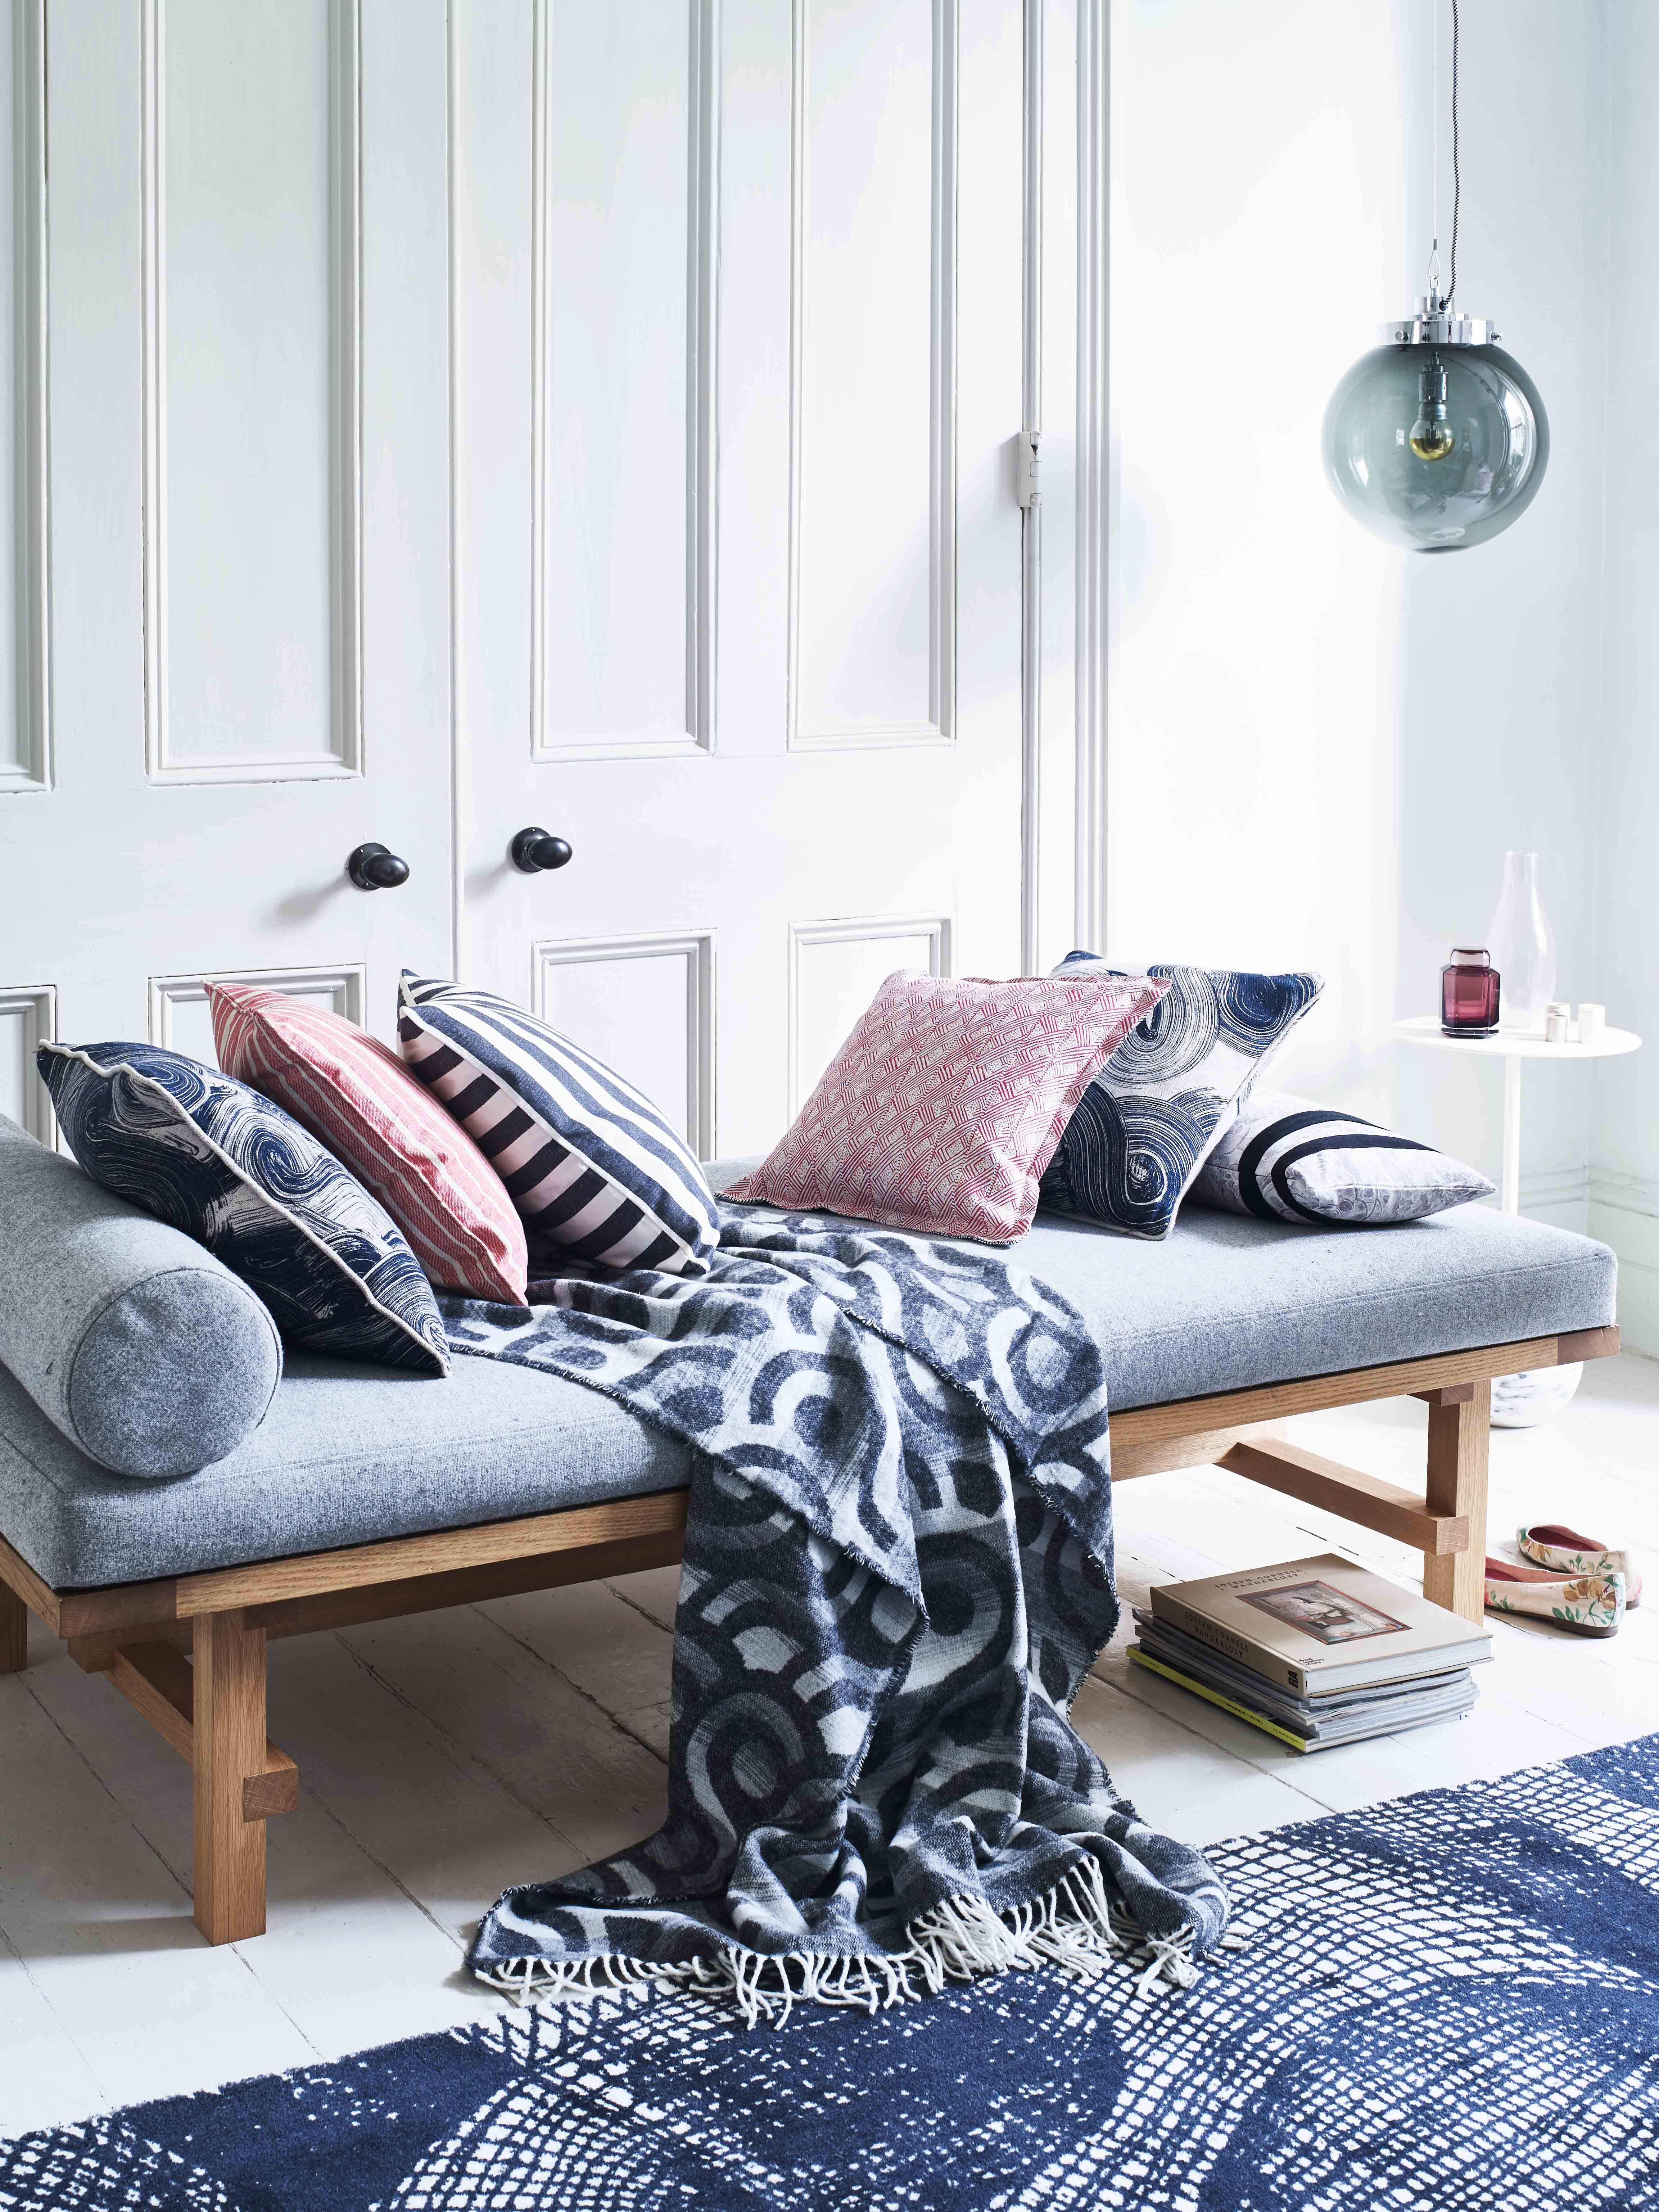 Cool Ways to Style Your Home with Check Pattern - Proud Home Decor